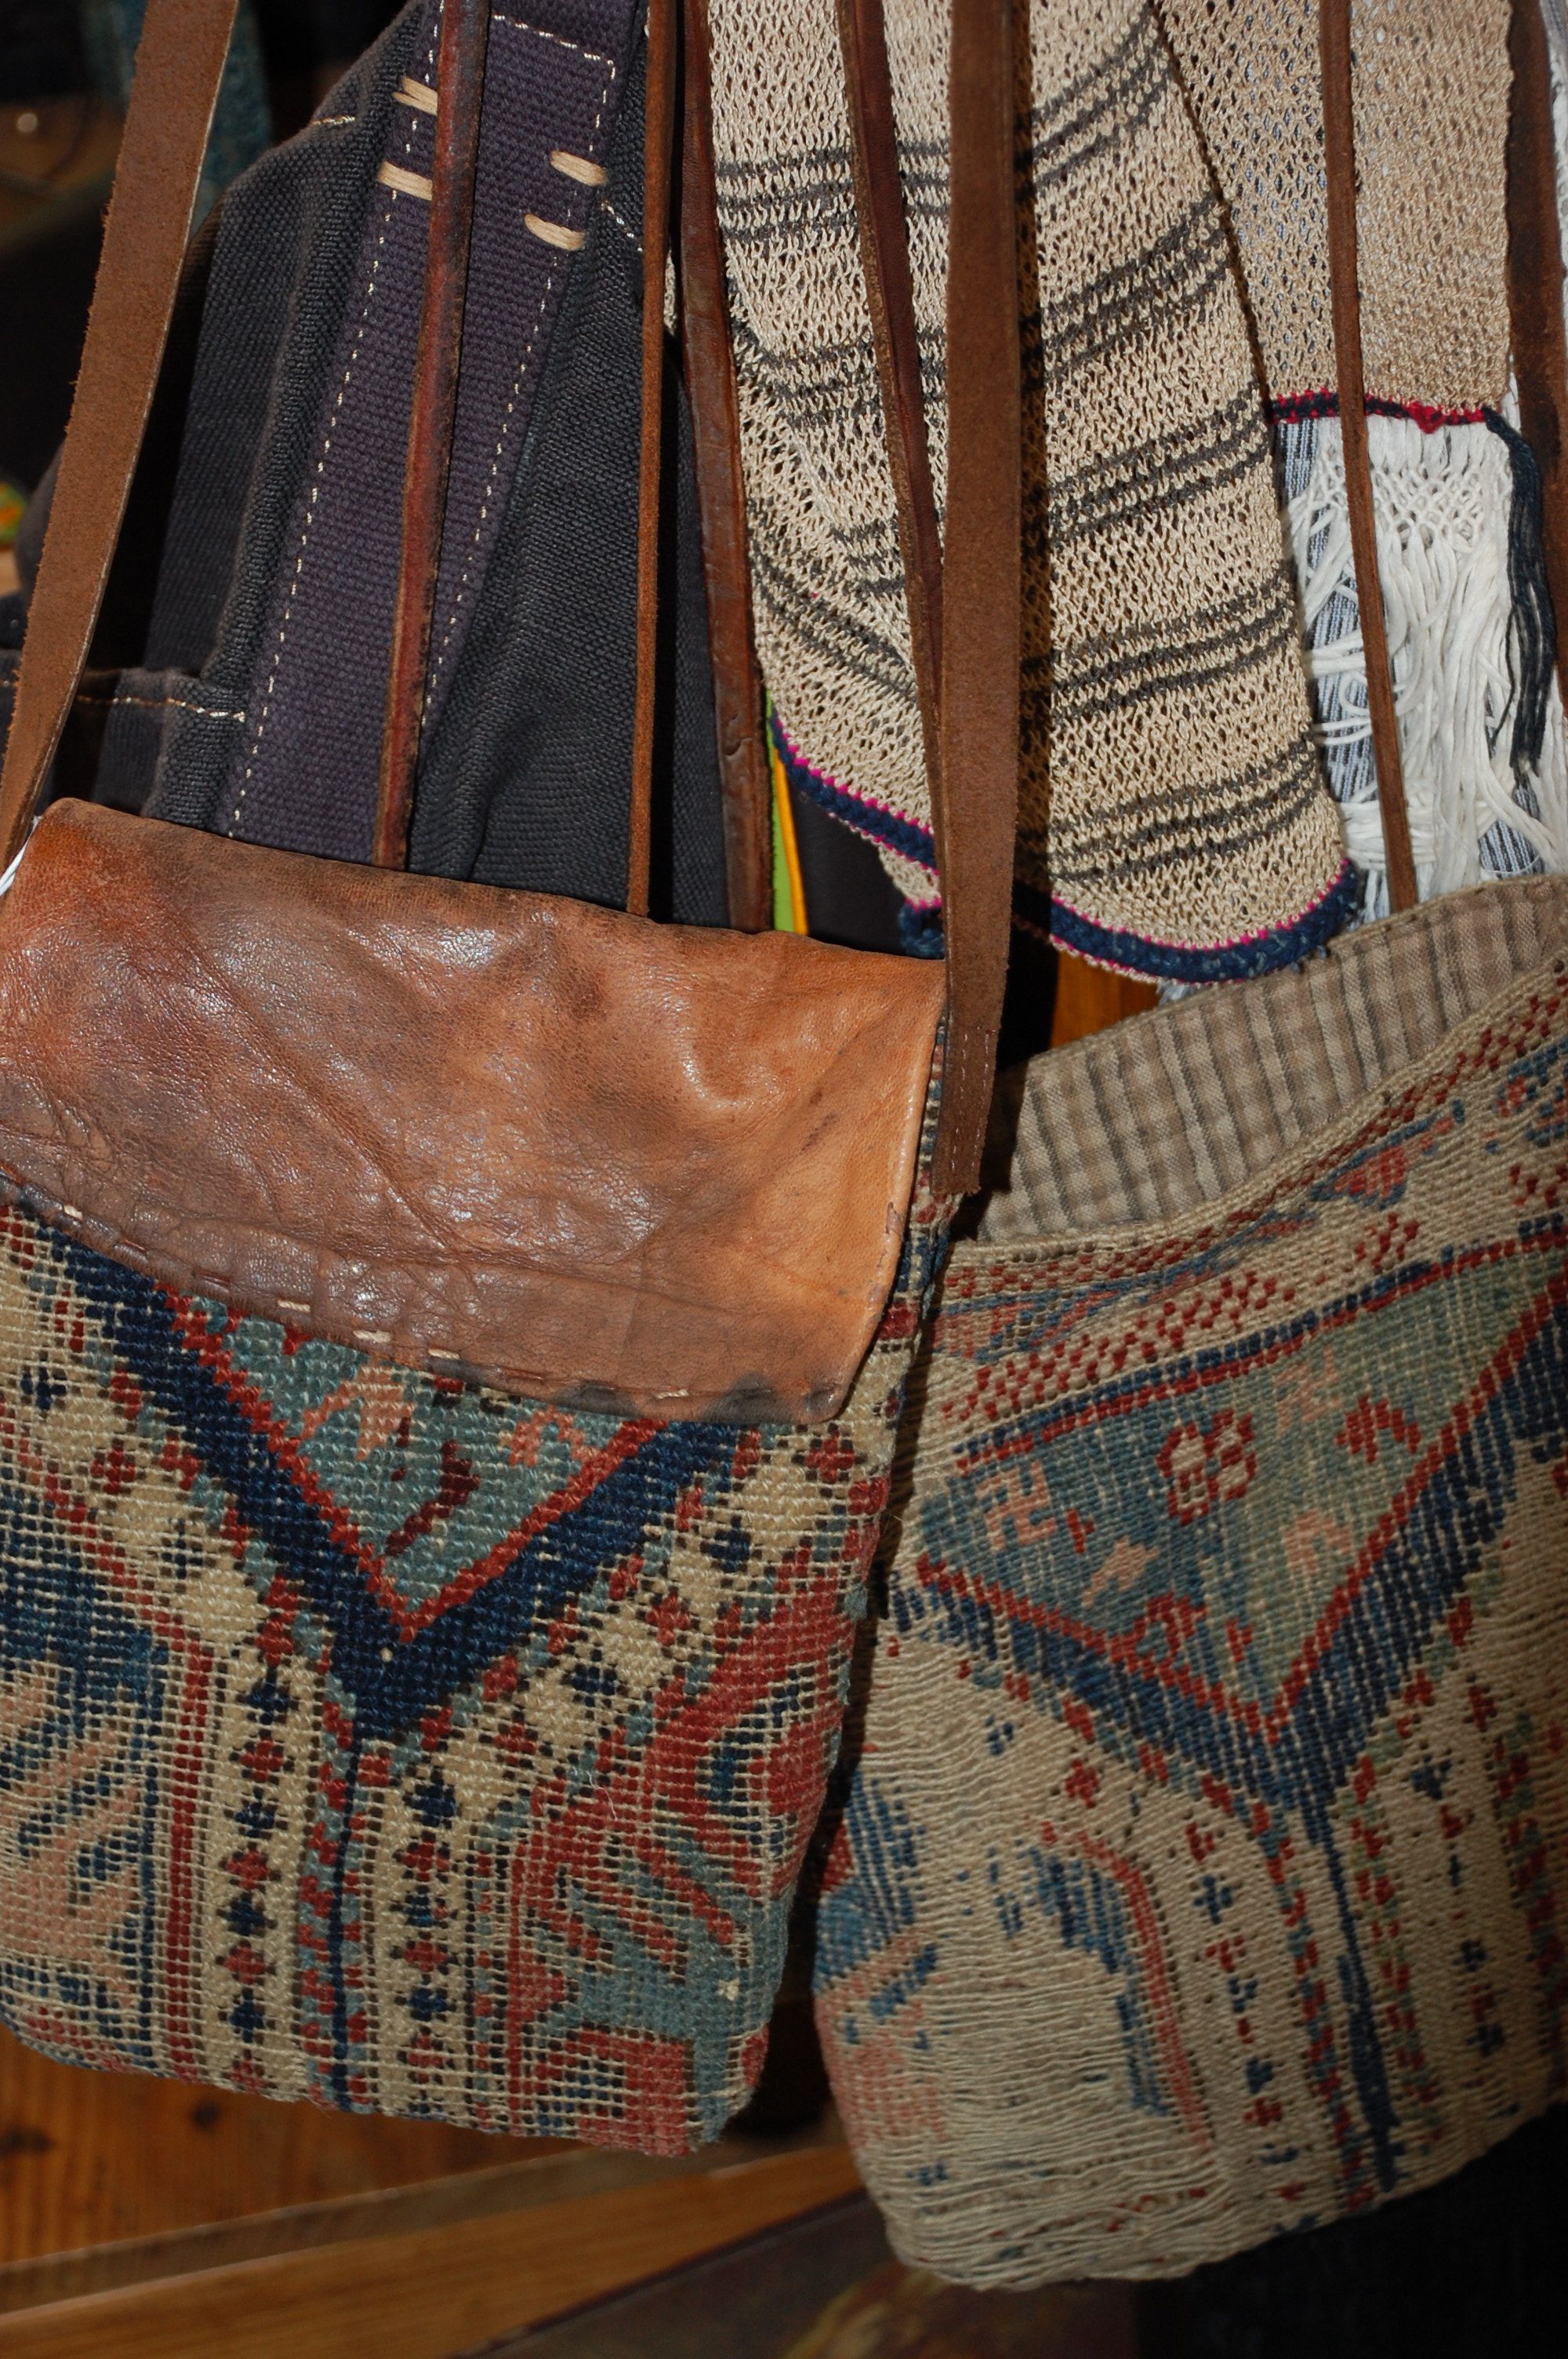 recycled bags from beautifully naturally aged leather